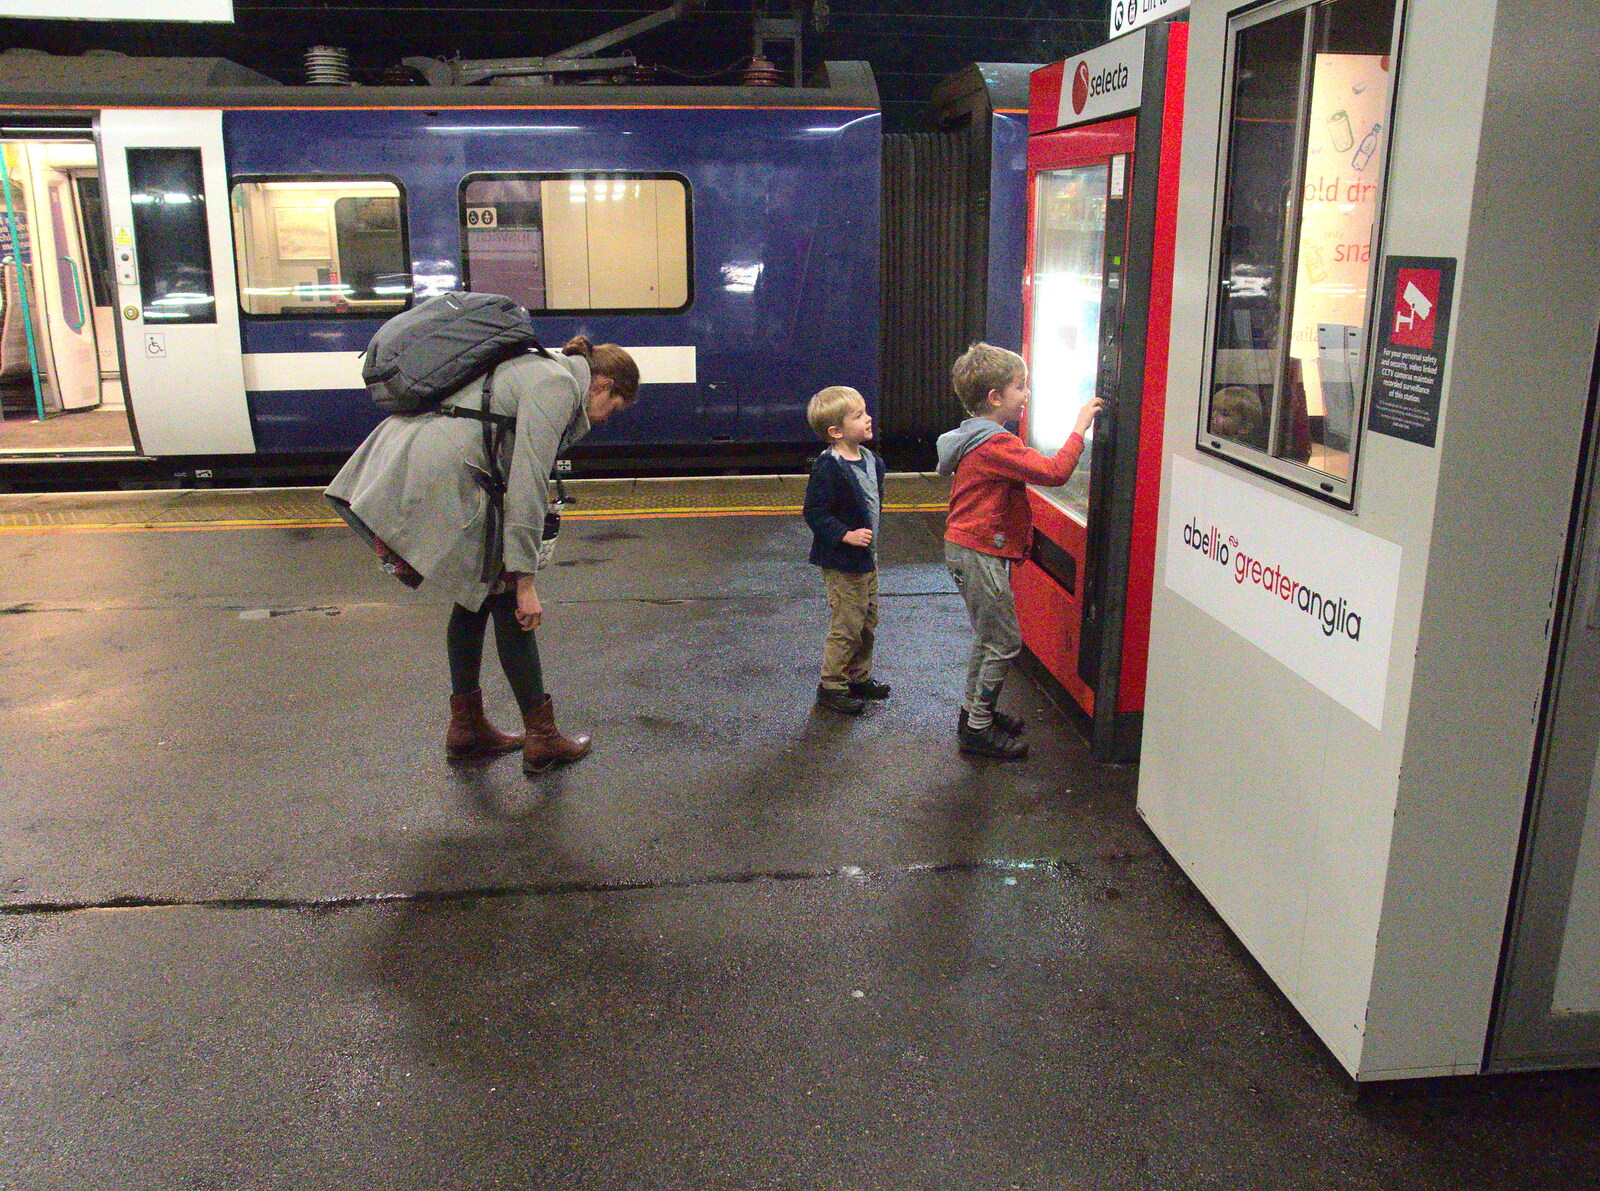 The boys check out a food machine from Isobel Goes to Lyon, Ipswich Station, Burrell Road - 24th January 2016